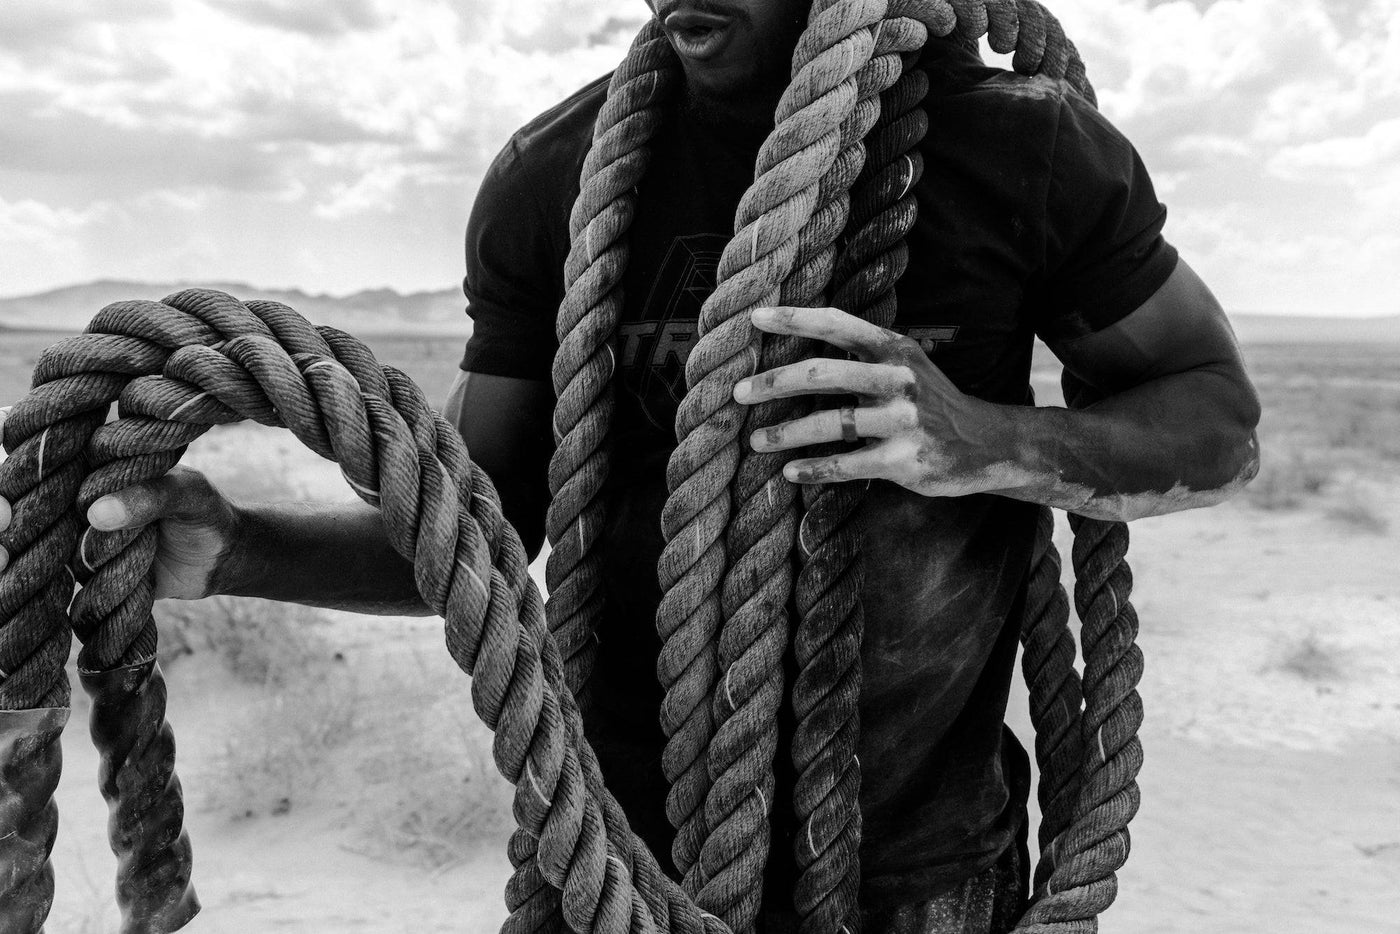 Battle Weighted Training Rope - Tru Grit Fitness